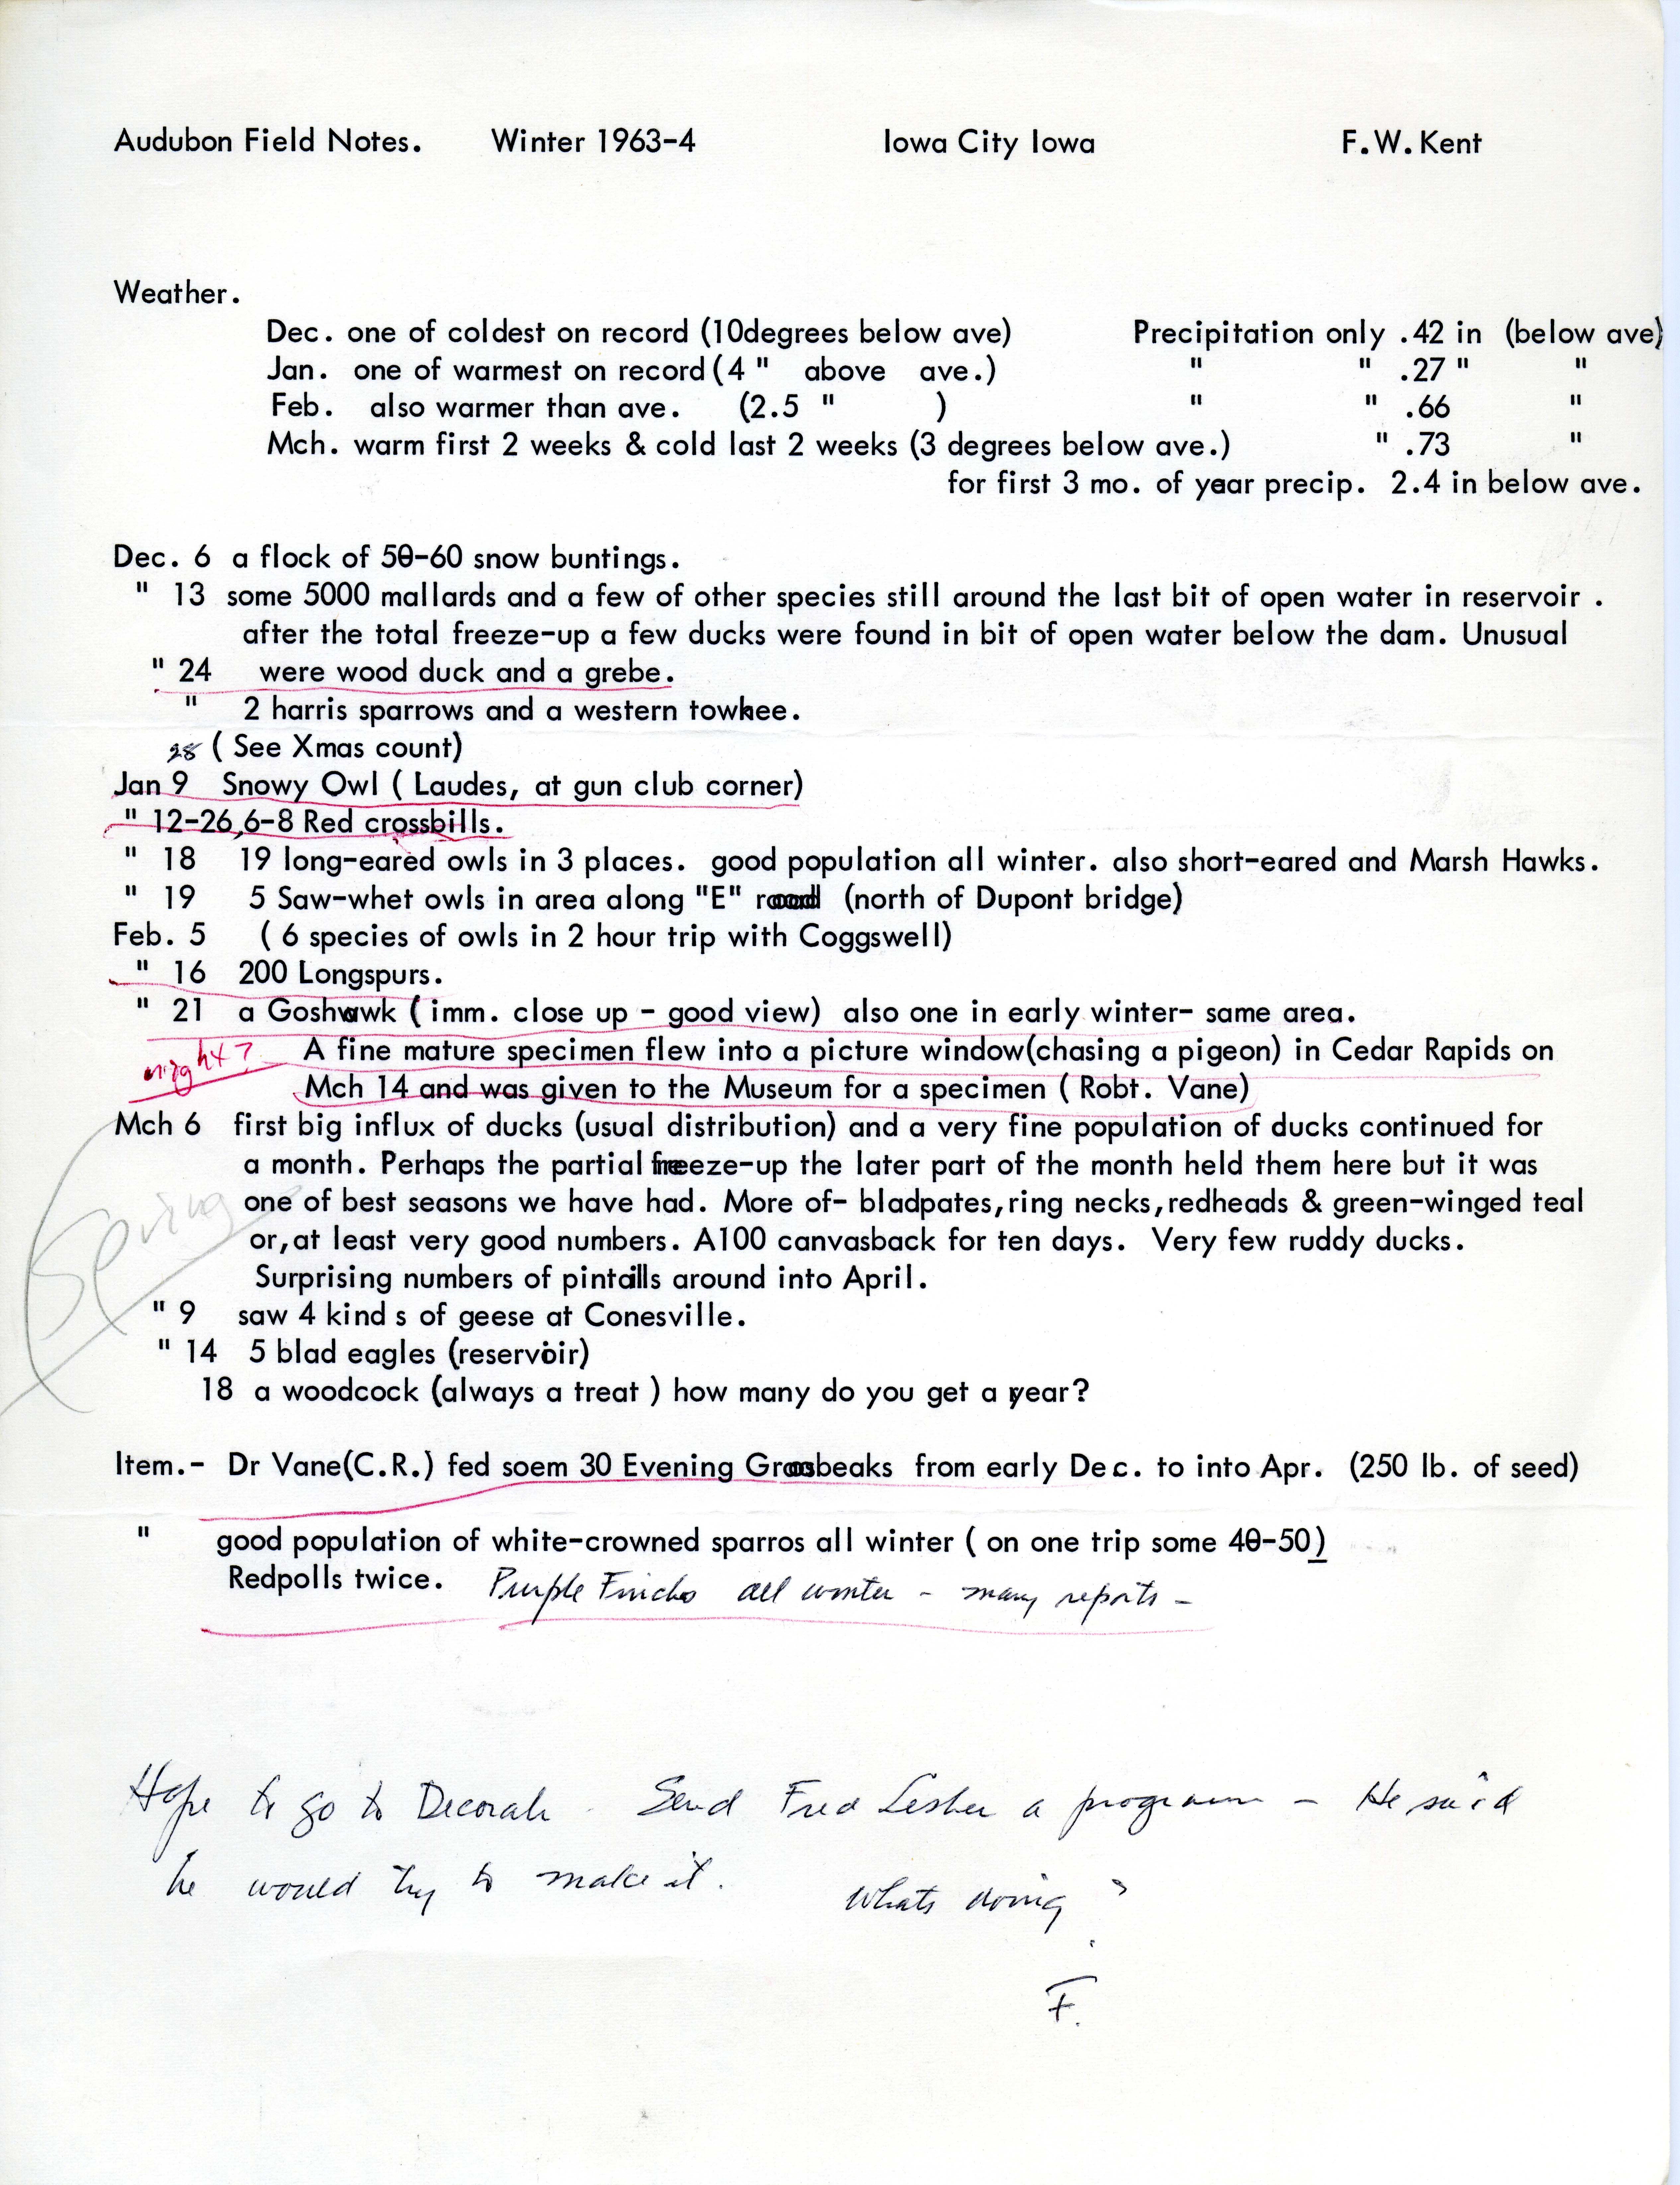 Audubon field notes for winter migration 1963-1964 contributed by Frederick W. Kent 